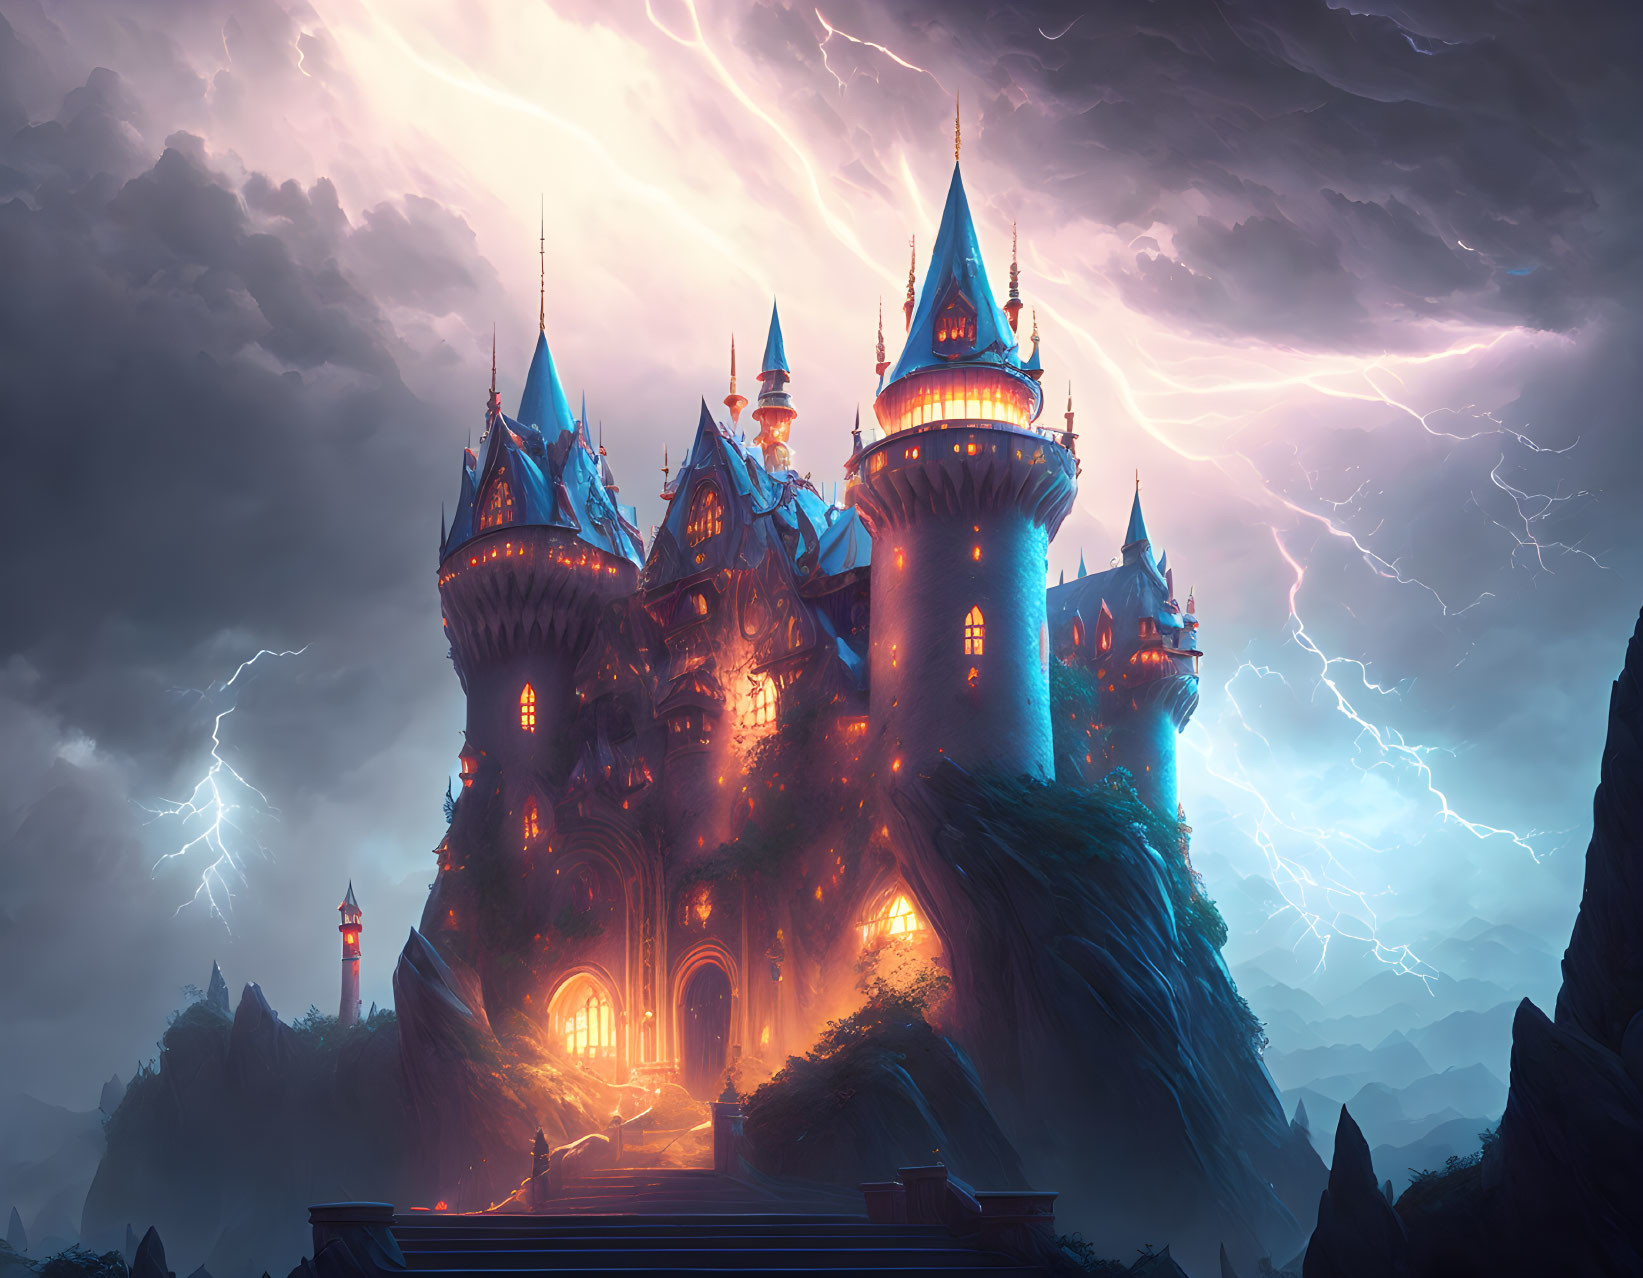 Castle on craggy cliff with purple lightning storm sky